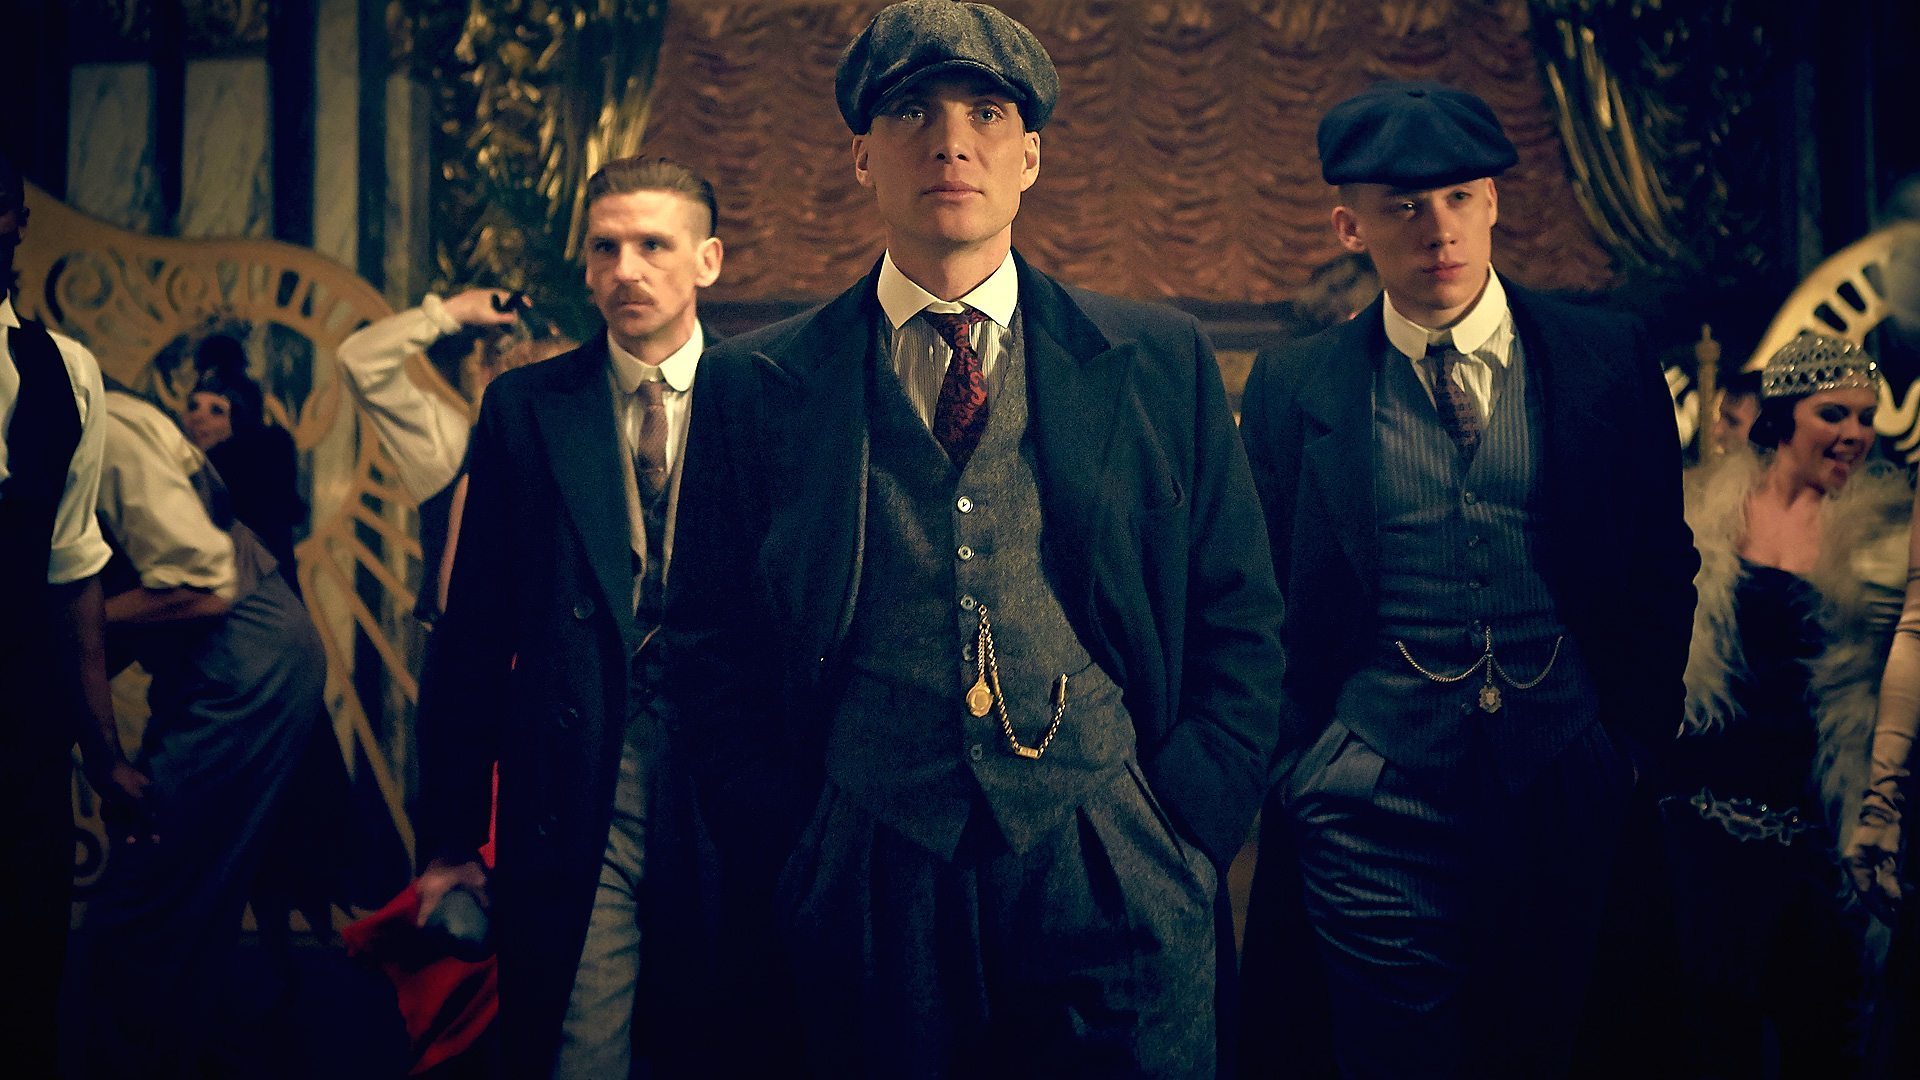 Peaky Blinders Soundtrack - Complete Song List | Tunefind